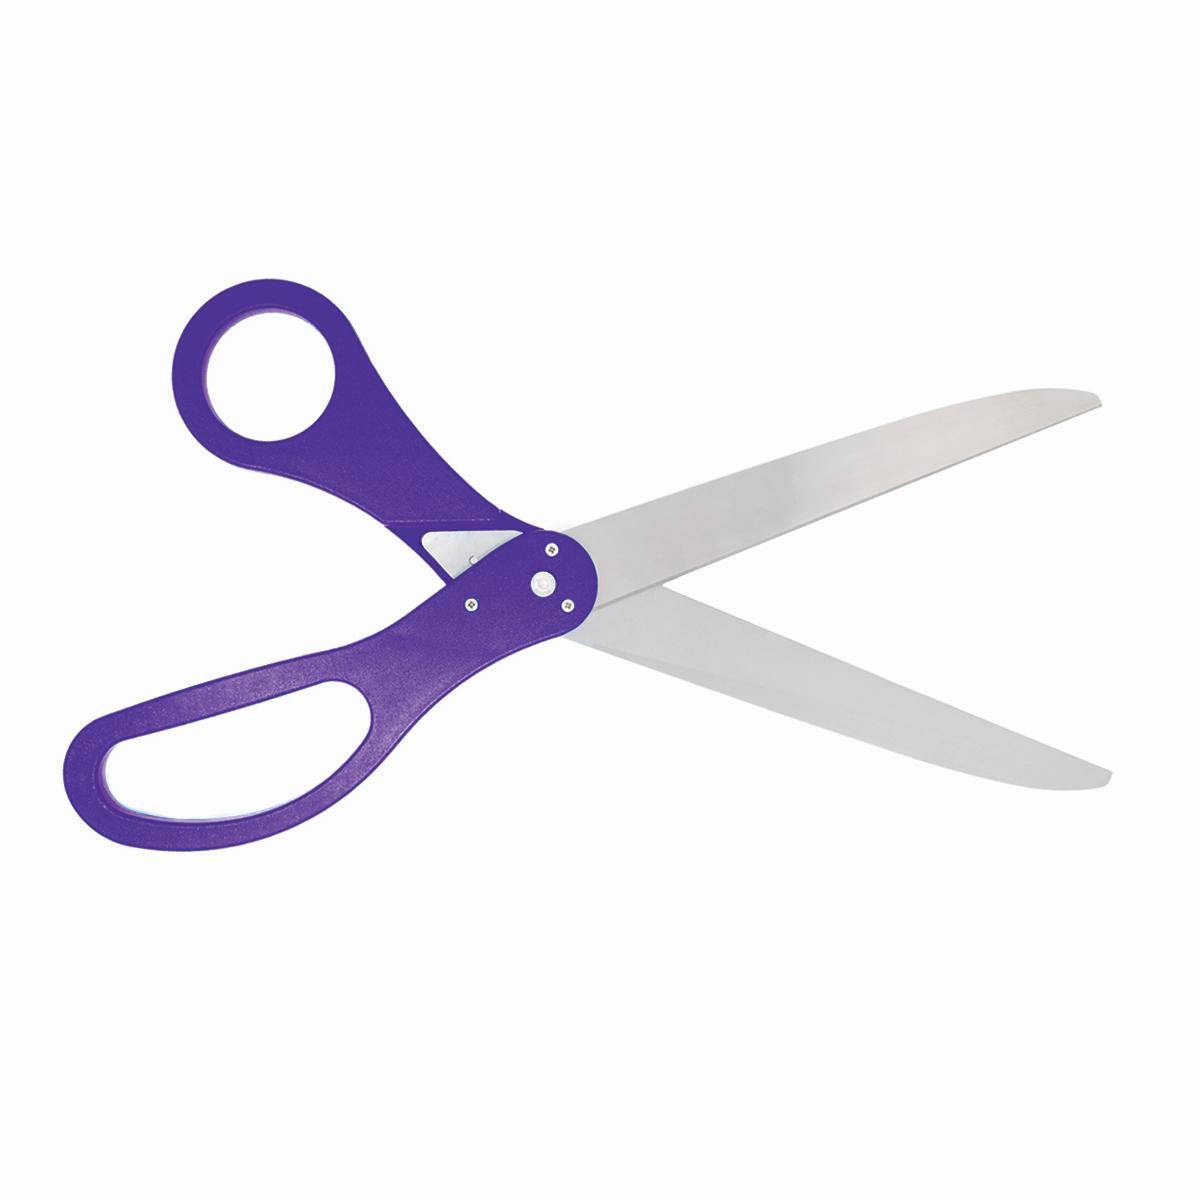 https://www.ceremonialsupplies.com/images/thumbs/0002497_purple-ribbon-cutting-scissors-with-silver-stainless-steel-blades.jpeg